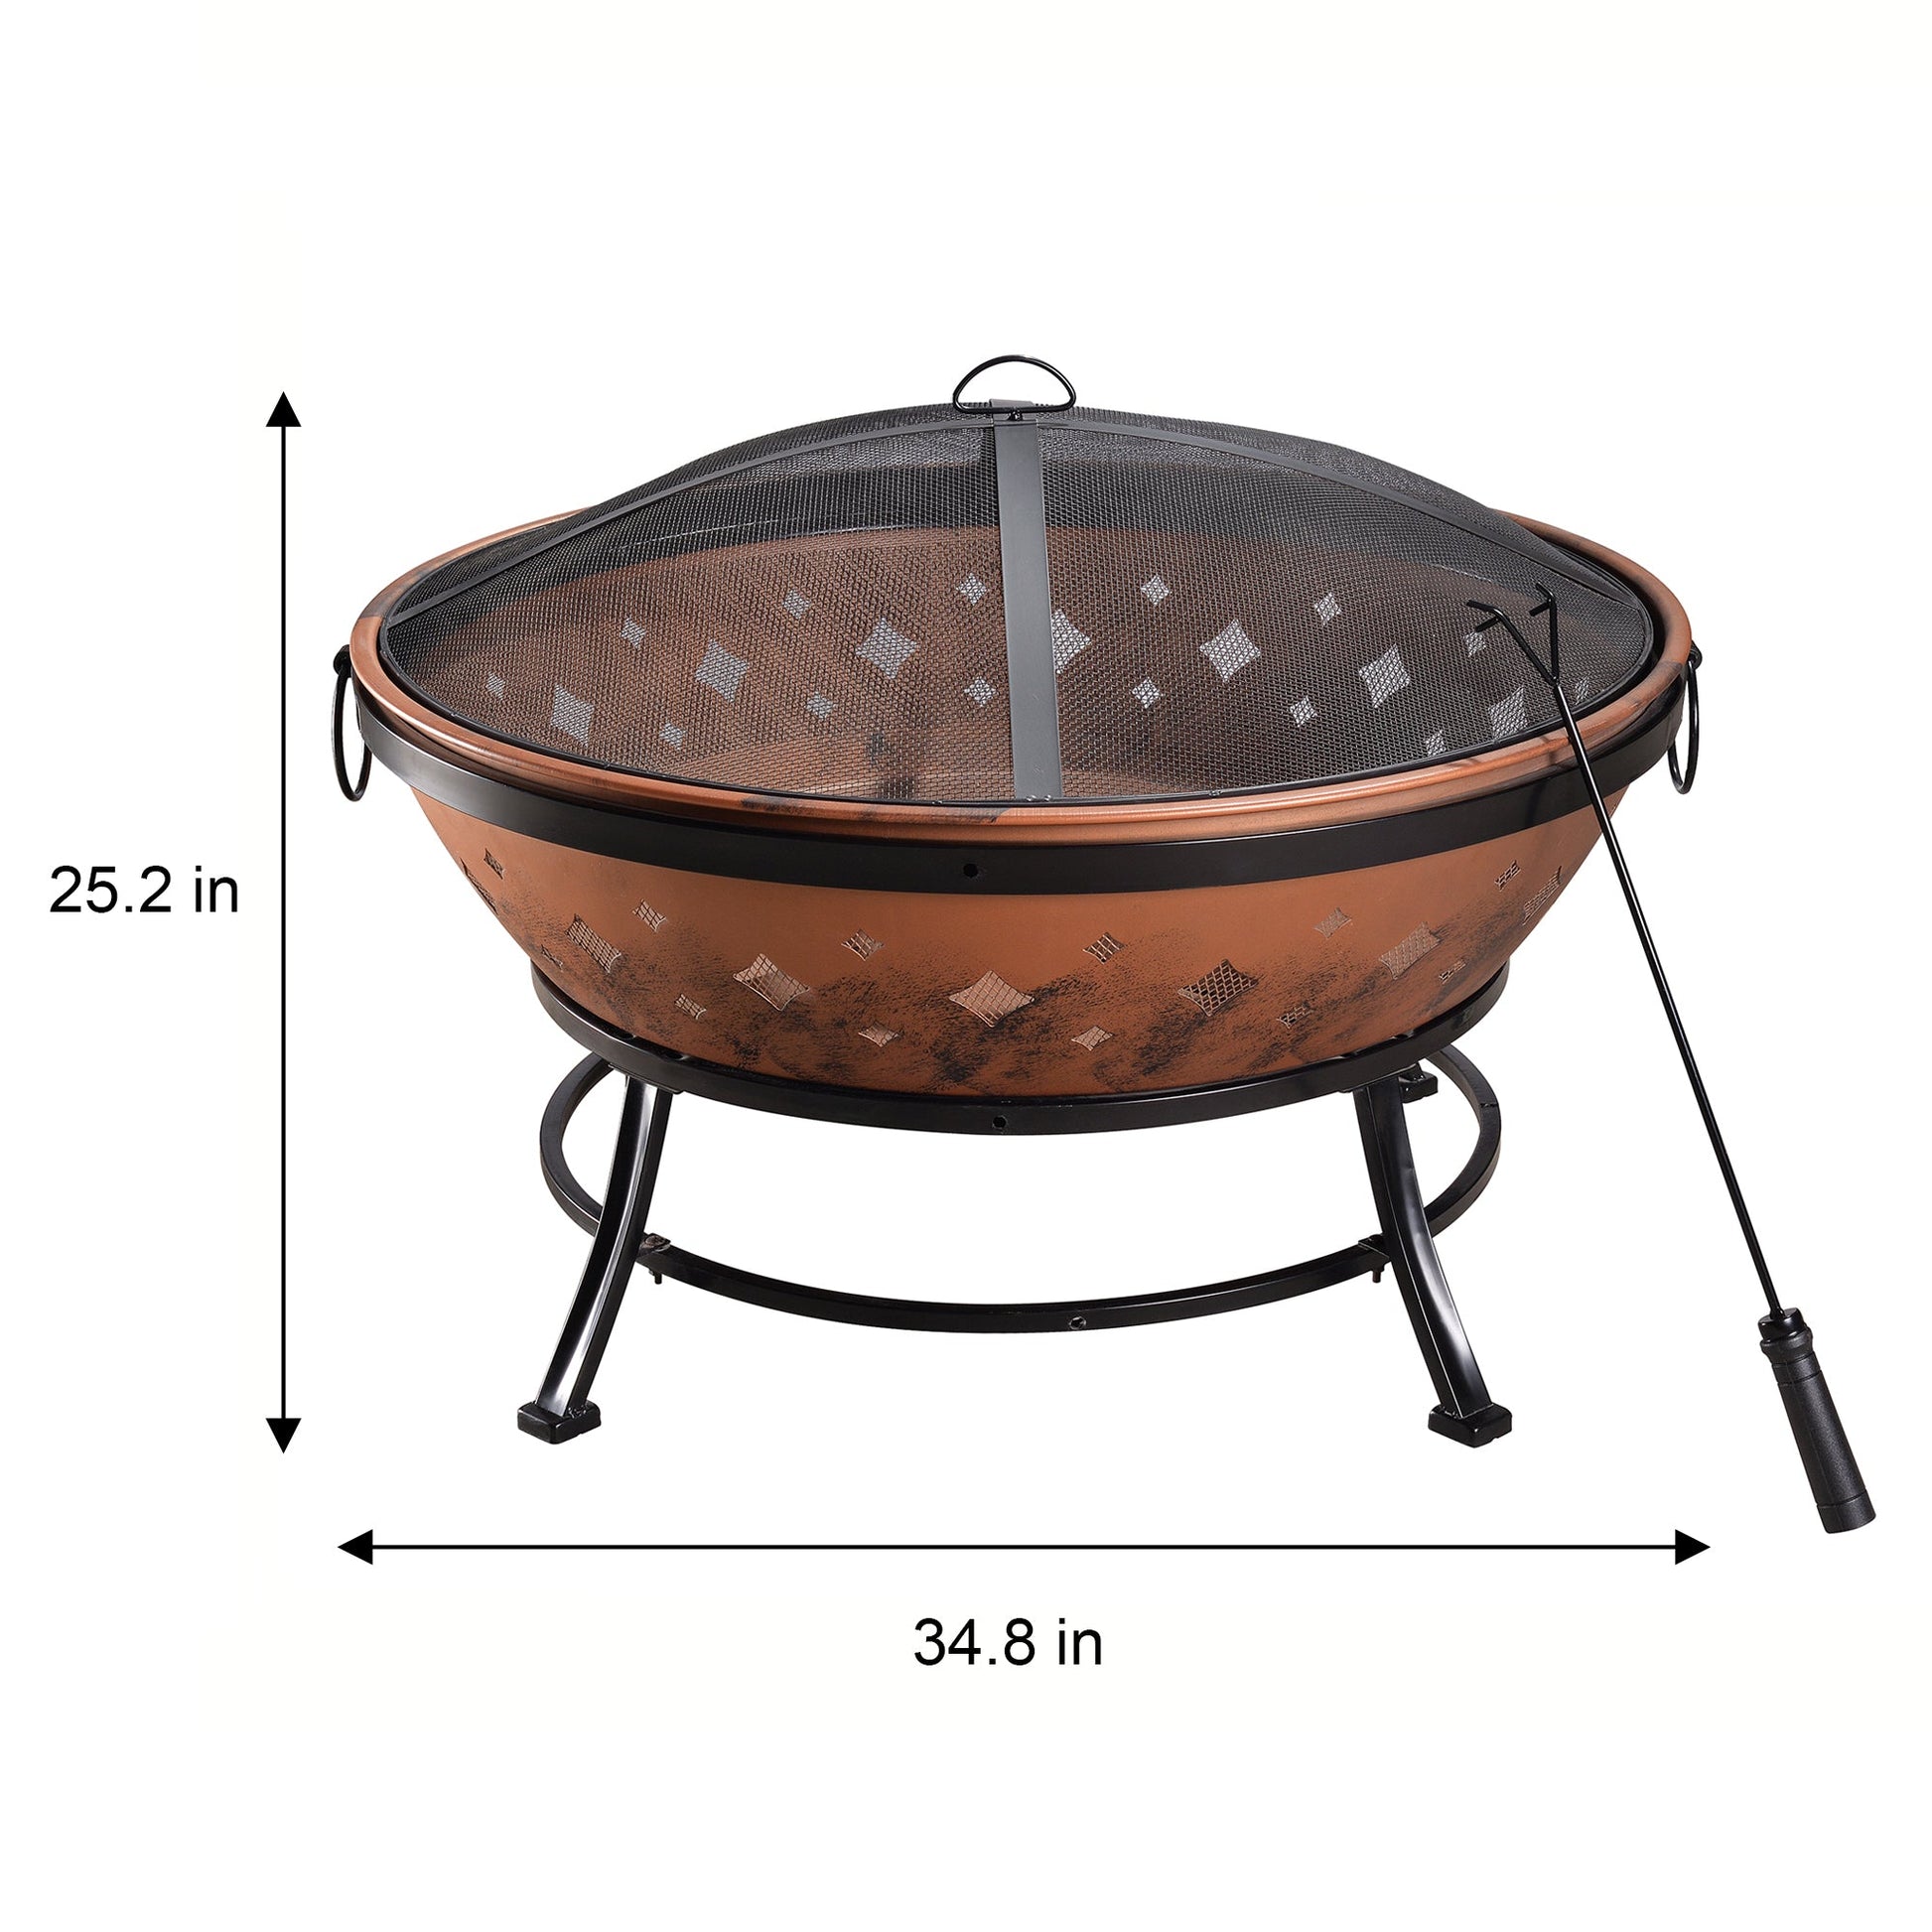 Teamson Home Wood Burning Fire Pit & Accessories - KXX  TI.CO